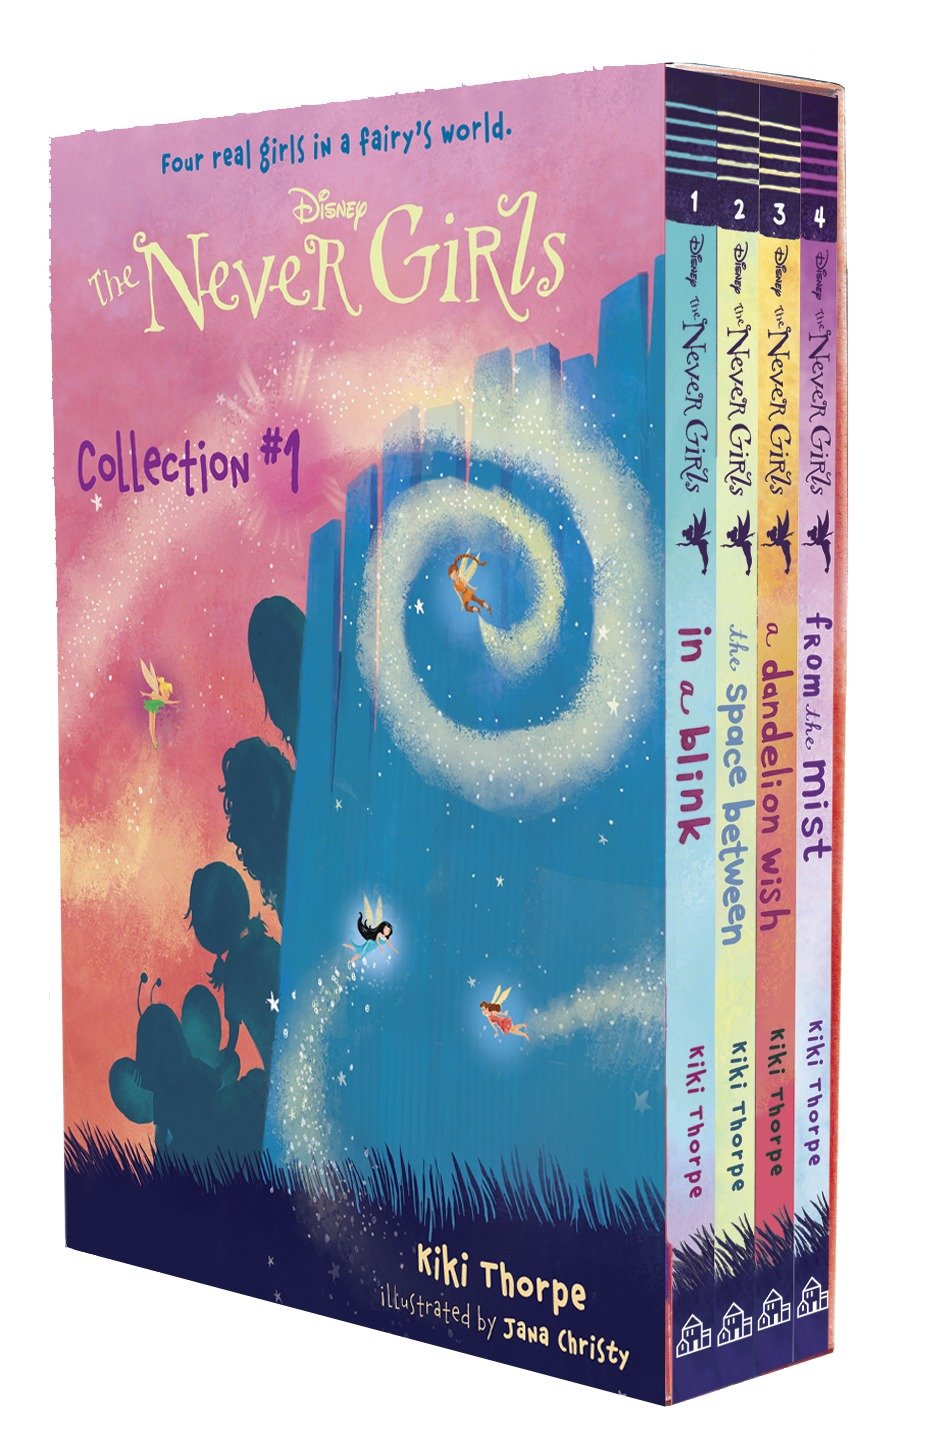 The Never Girls Collection #1 (Disney: The Never Girls)